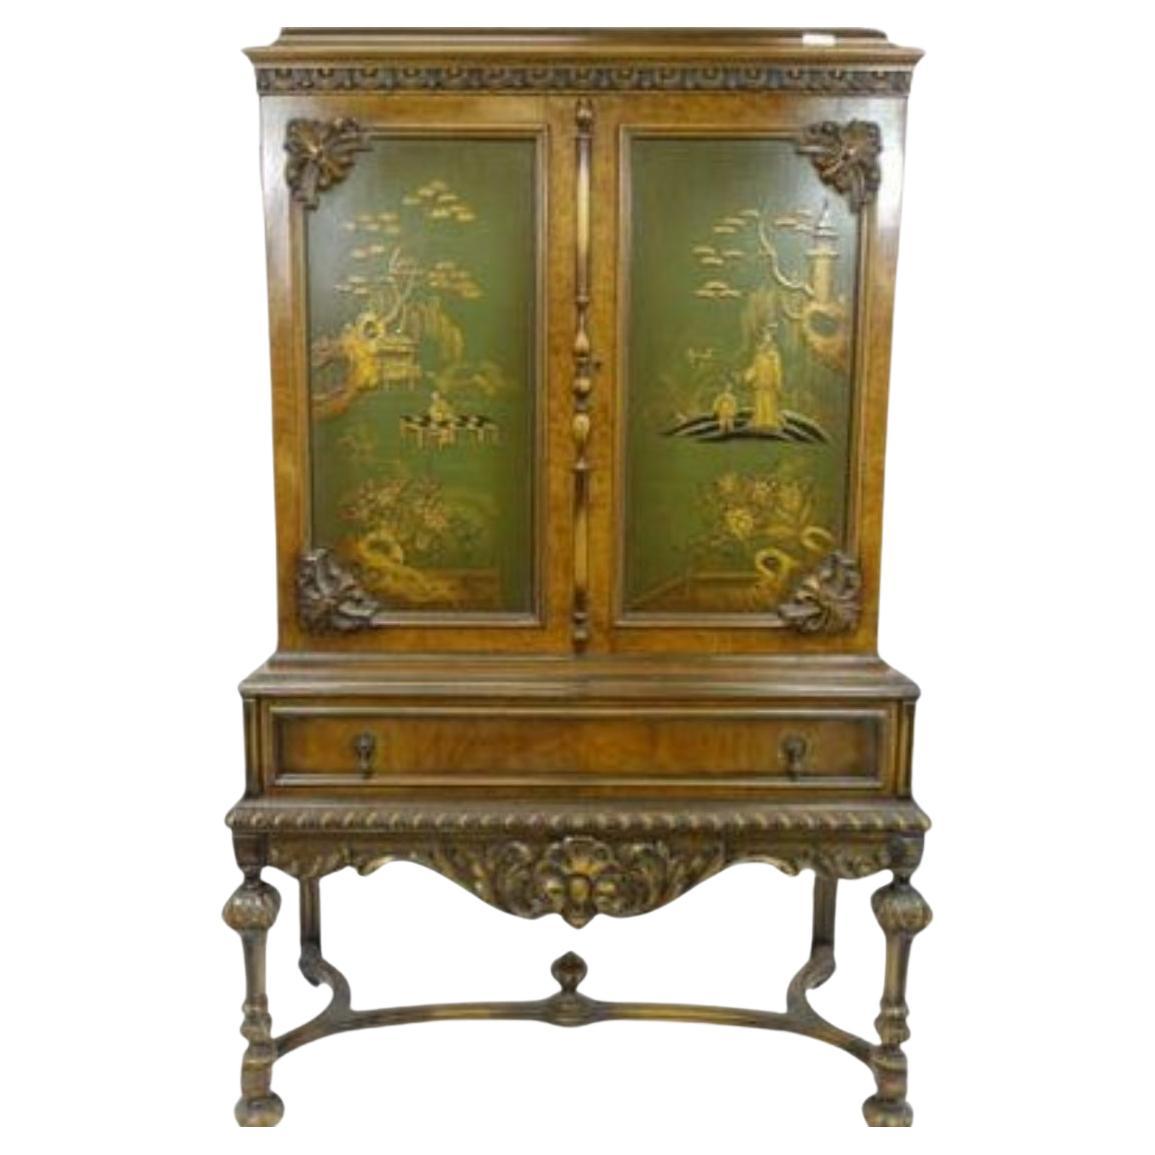 Beautiful Hand-Painted Oriental Design Cabinet With Elaborate Woodwork